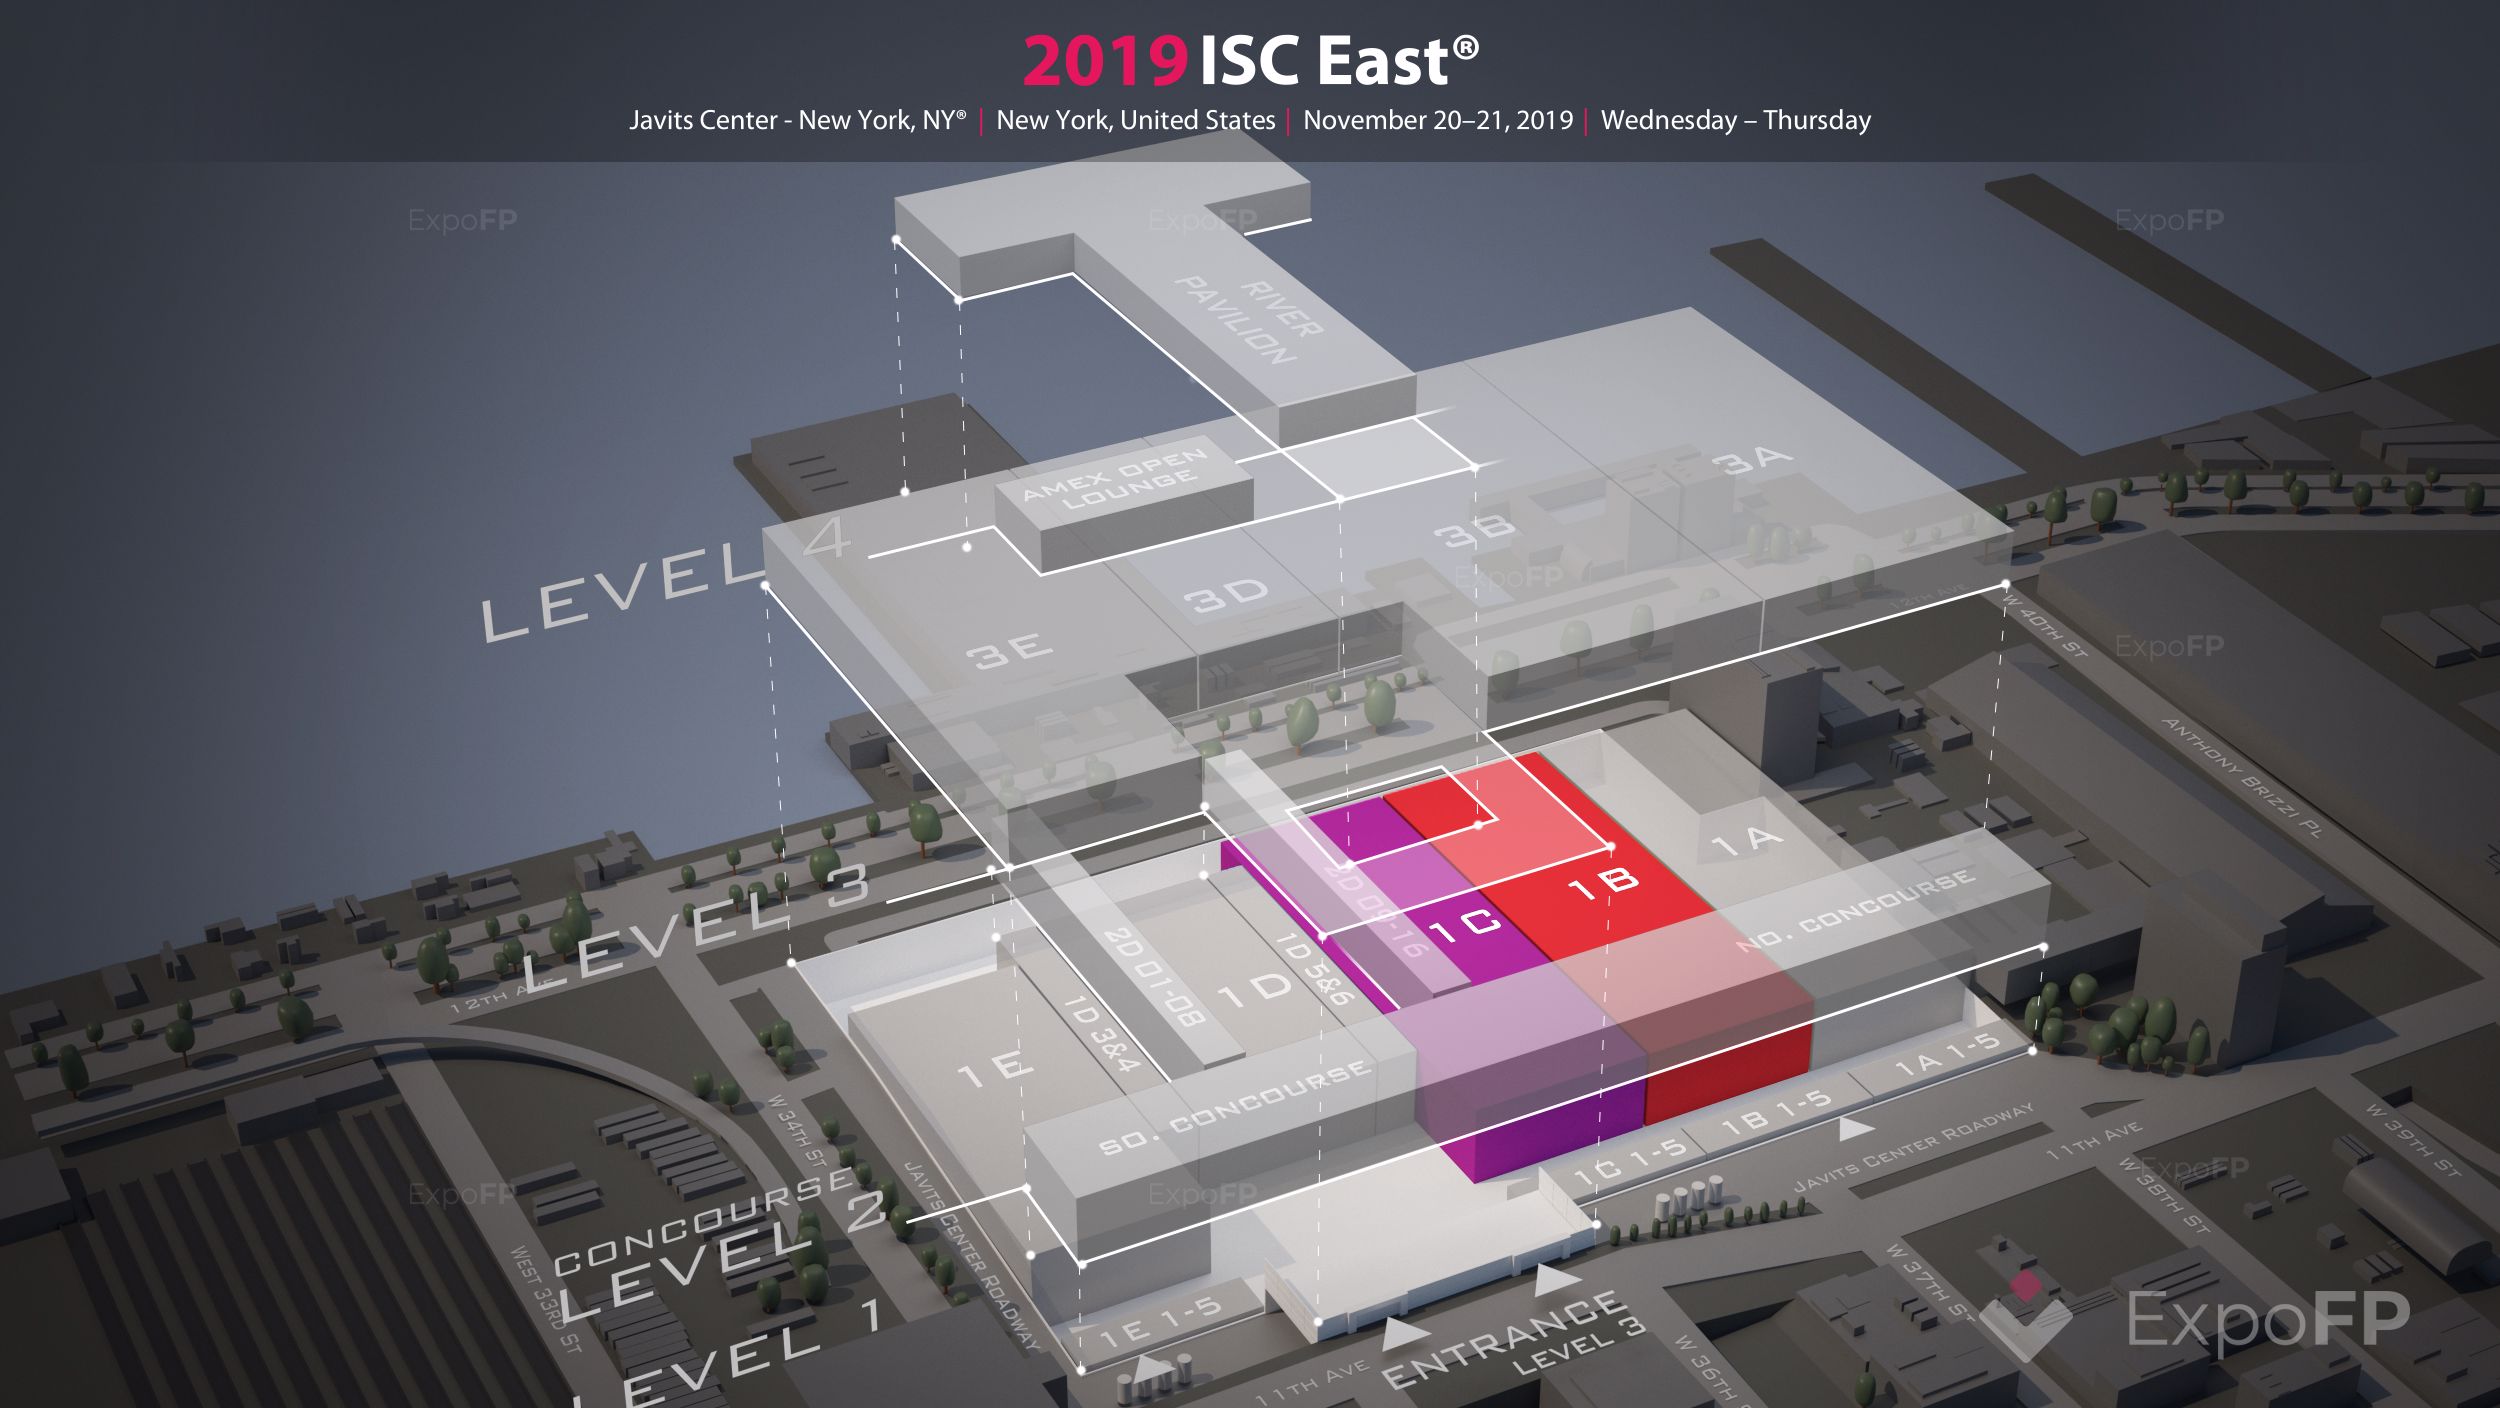 ISC East 2019 in Javits Center New York, NY